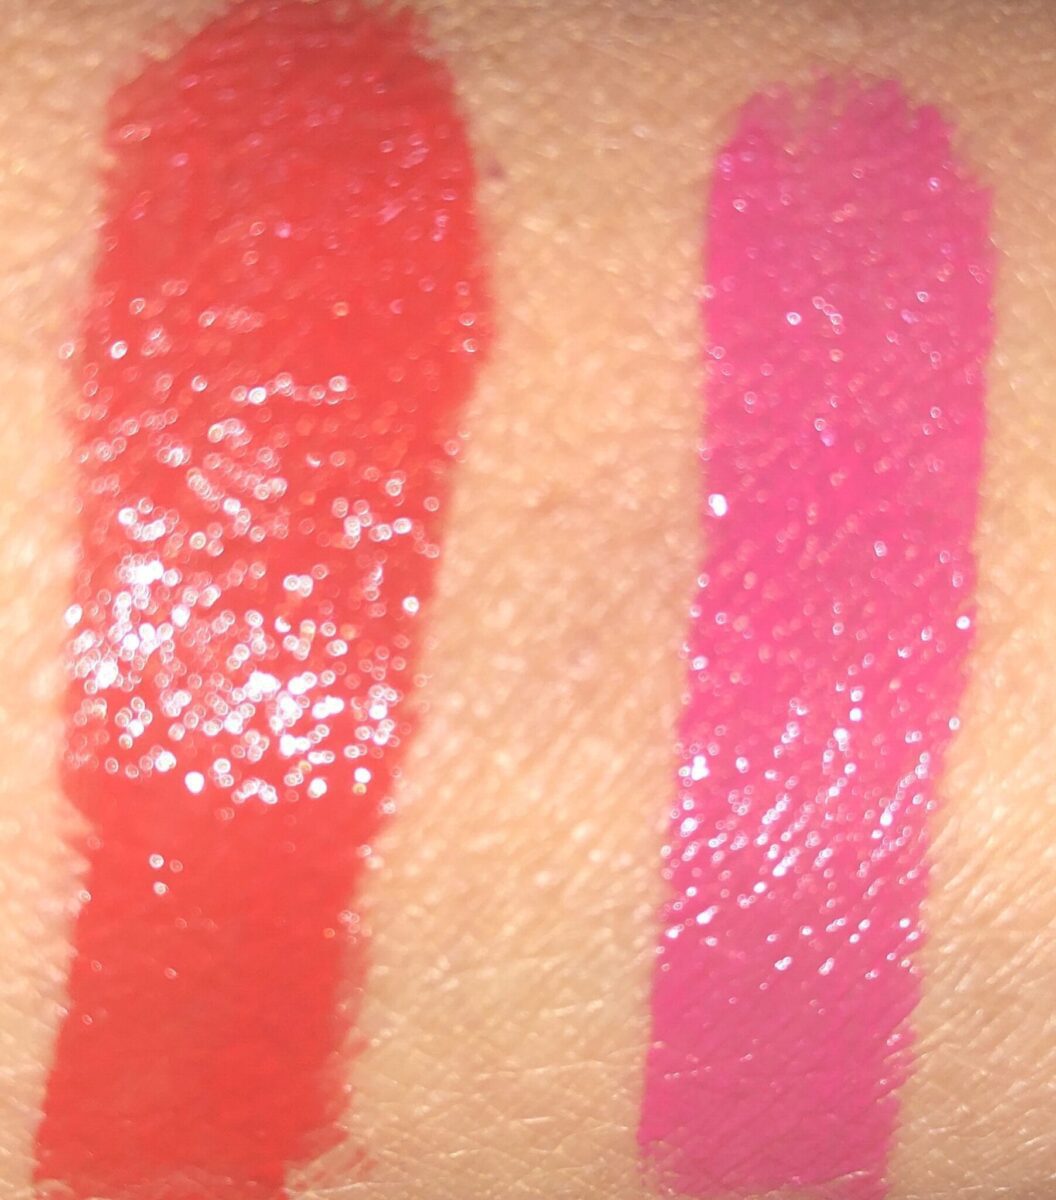 SWATCHES L TO R: GRATEFUL, LUCKY